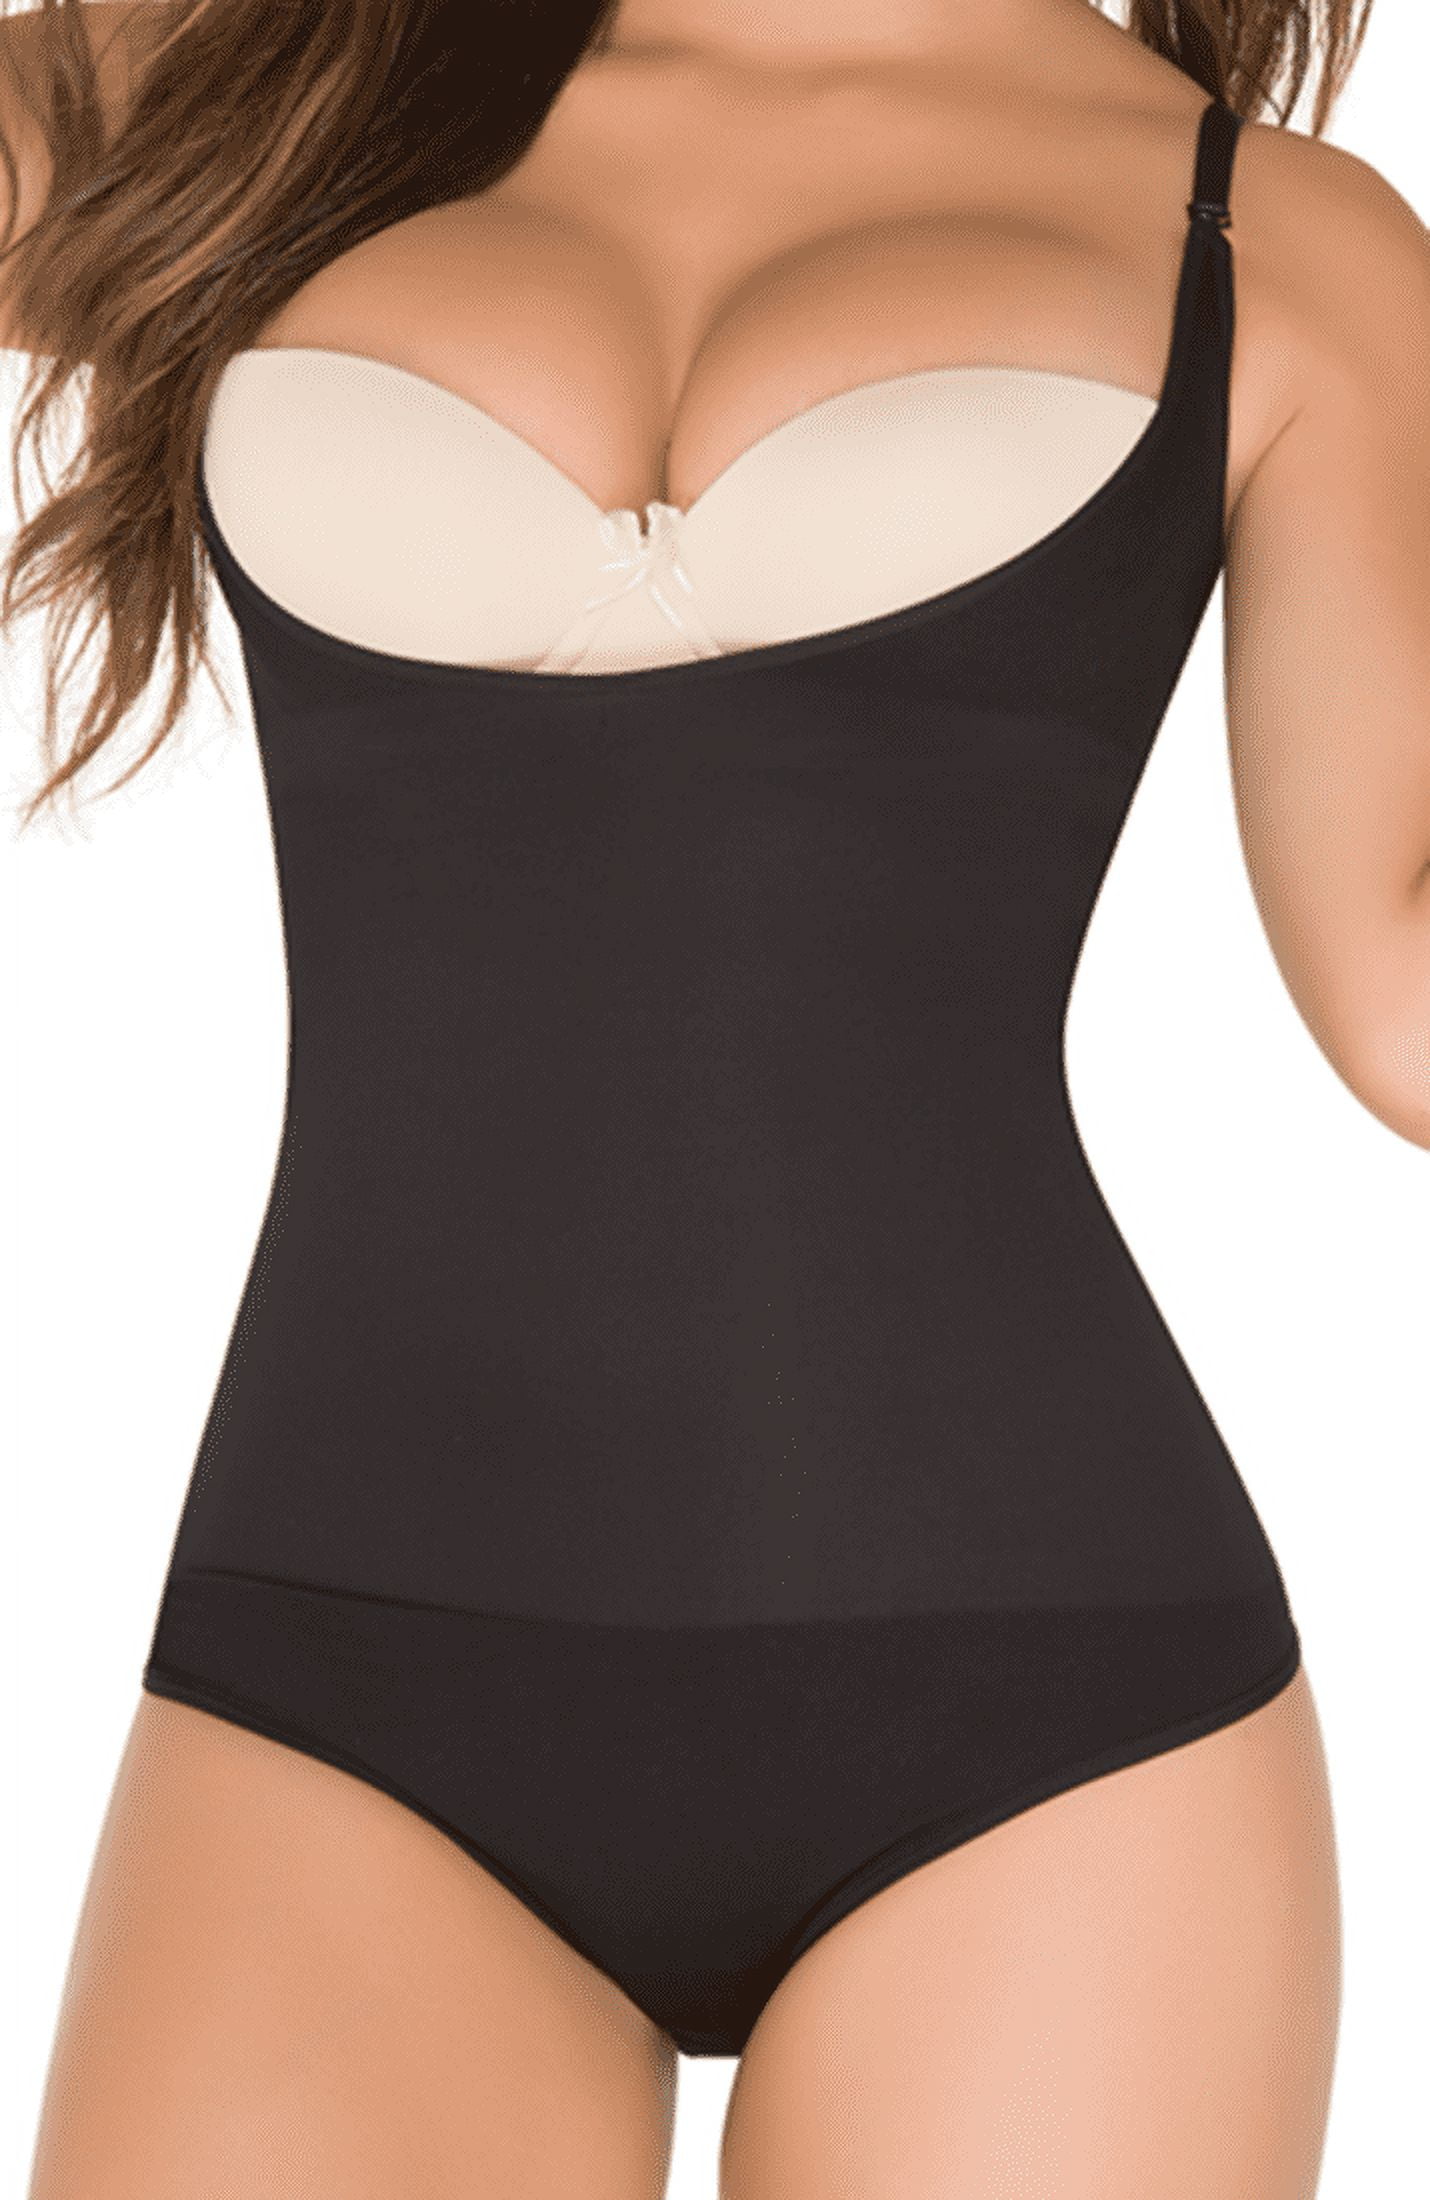 Girdle Shapewear Bodysuit-Faja Colombiana Fresh and Light Fajas Colombianas  para Adelgazar y Reducir body briefer for women Seamless Gusset Opening  with Hooks Open Bust Adjustable Straps Back Support 